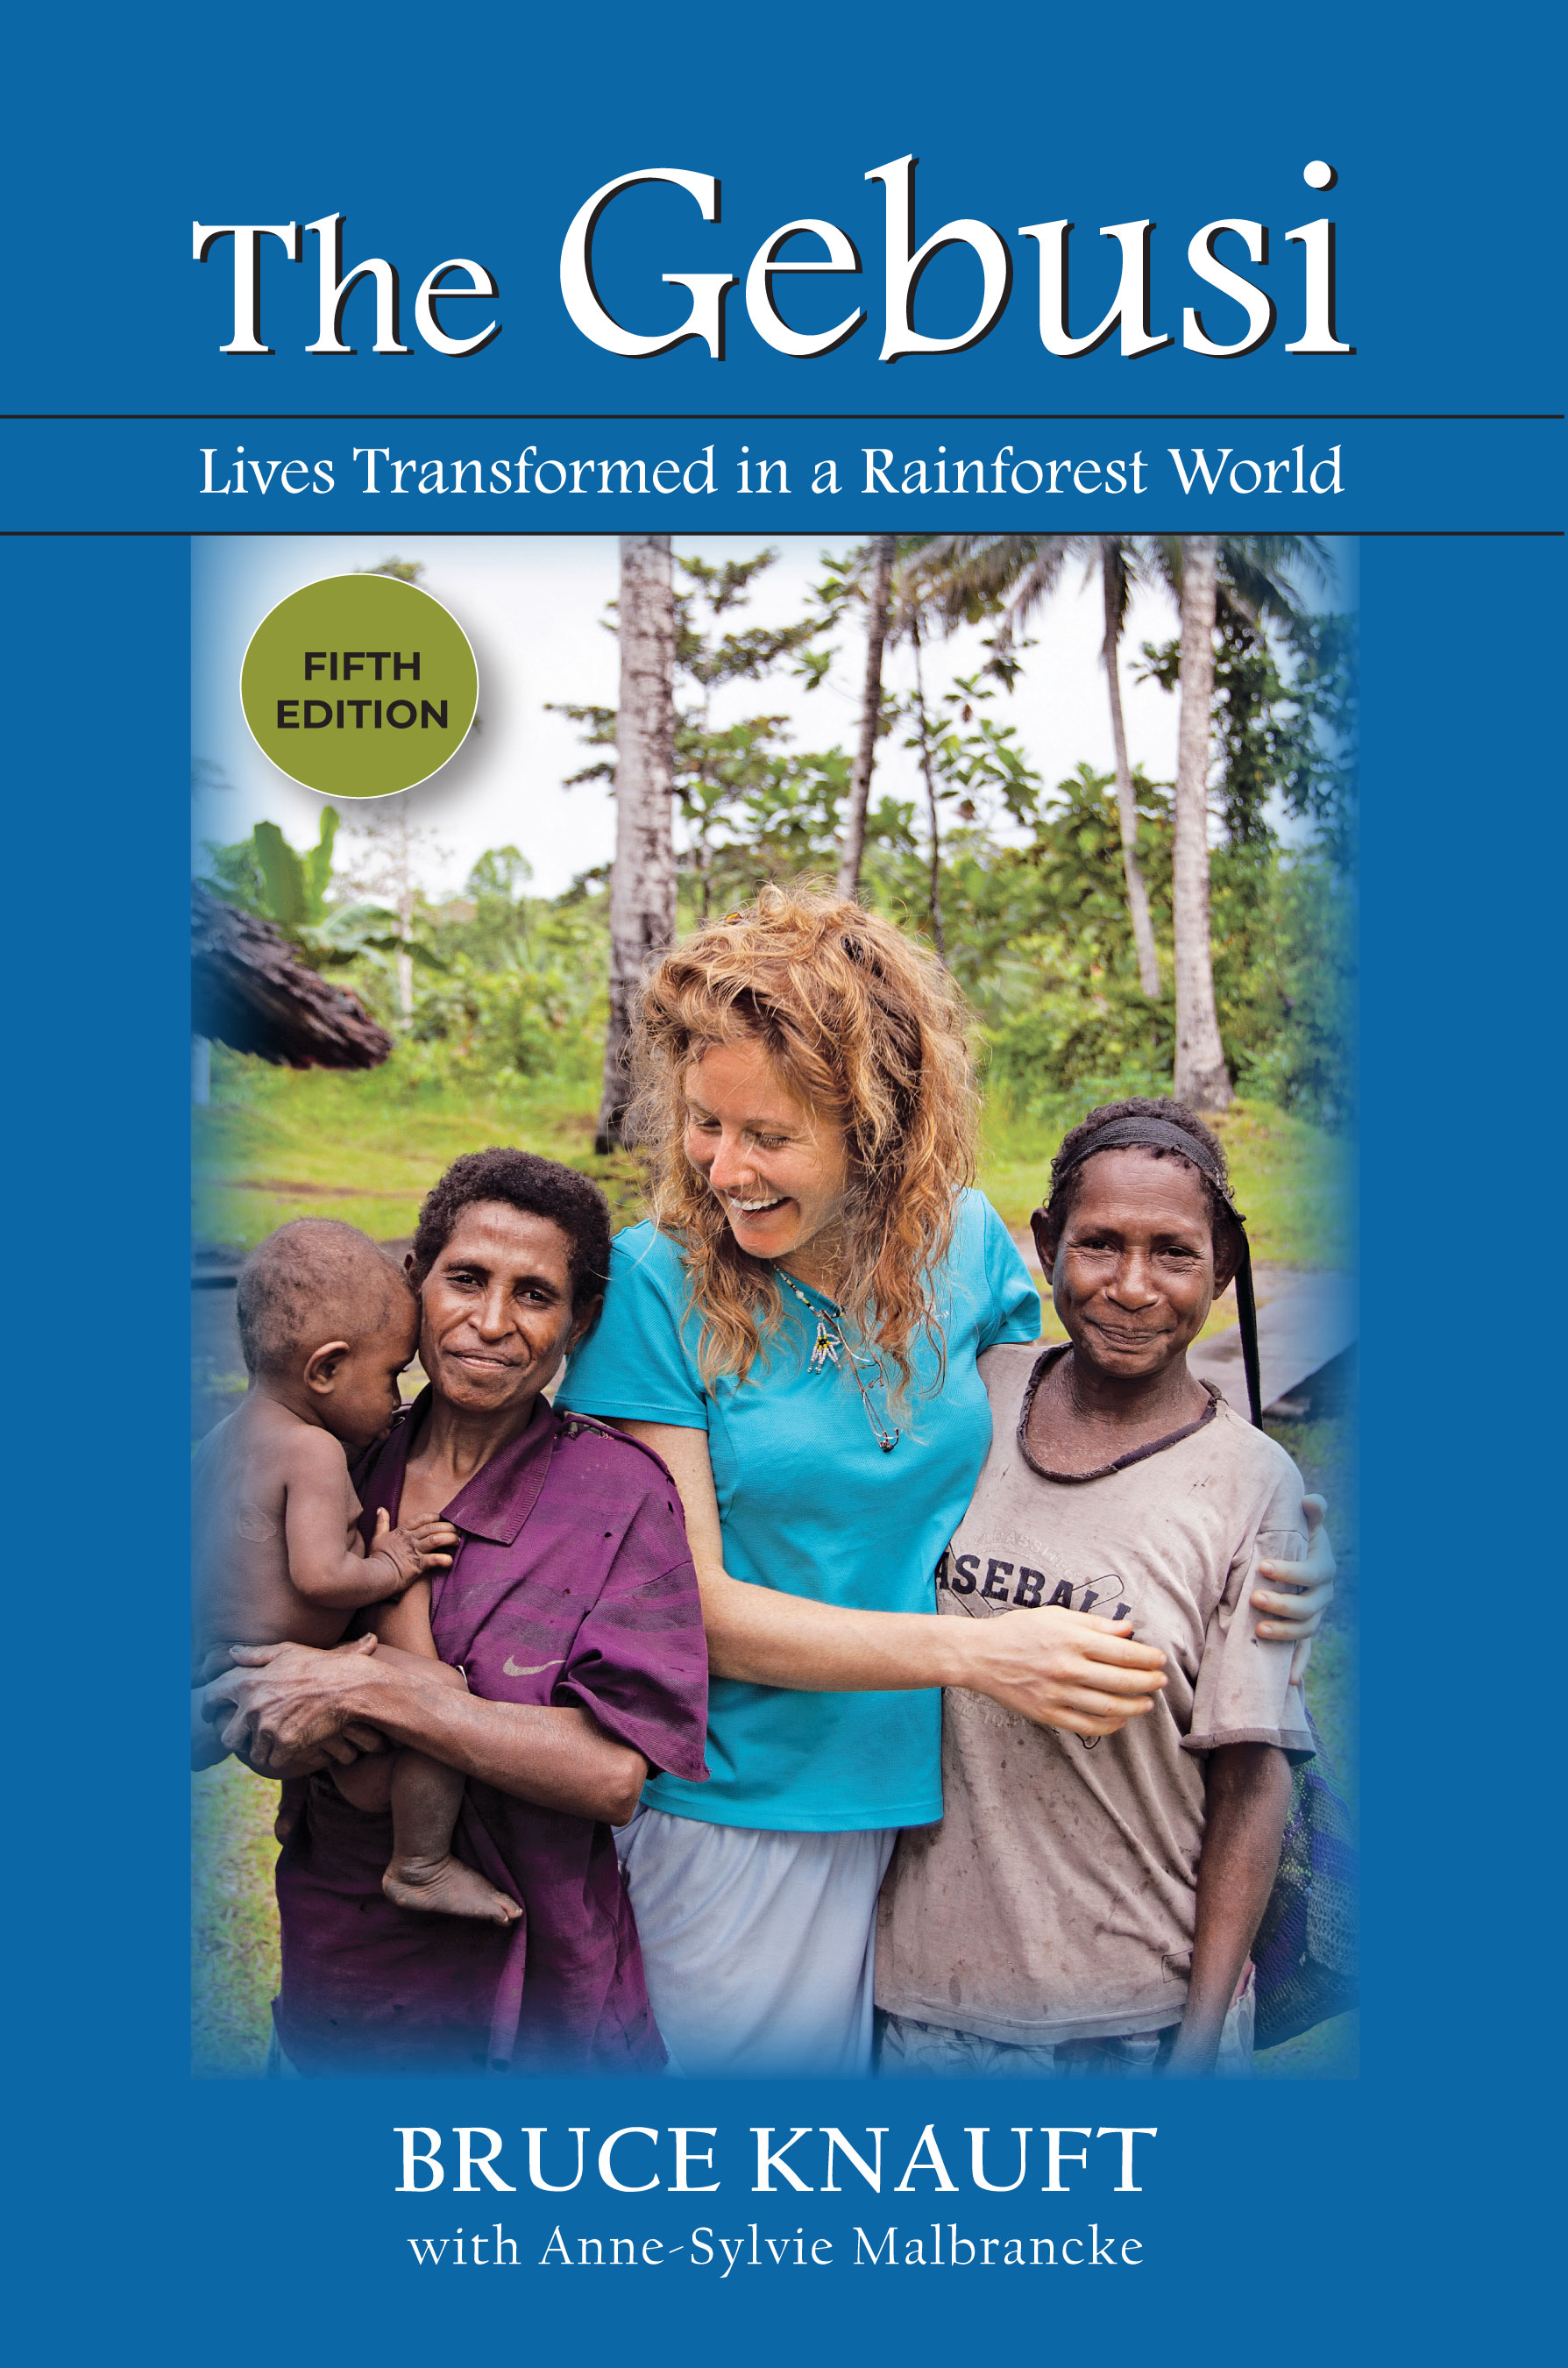 The Gebusi: Lives Transformed in a Rainforest World, Fifth Edition by Bruce  Knauft with Anne-Sylvie  Malbrancke